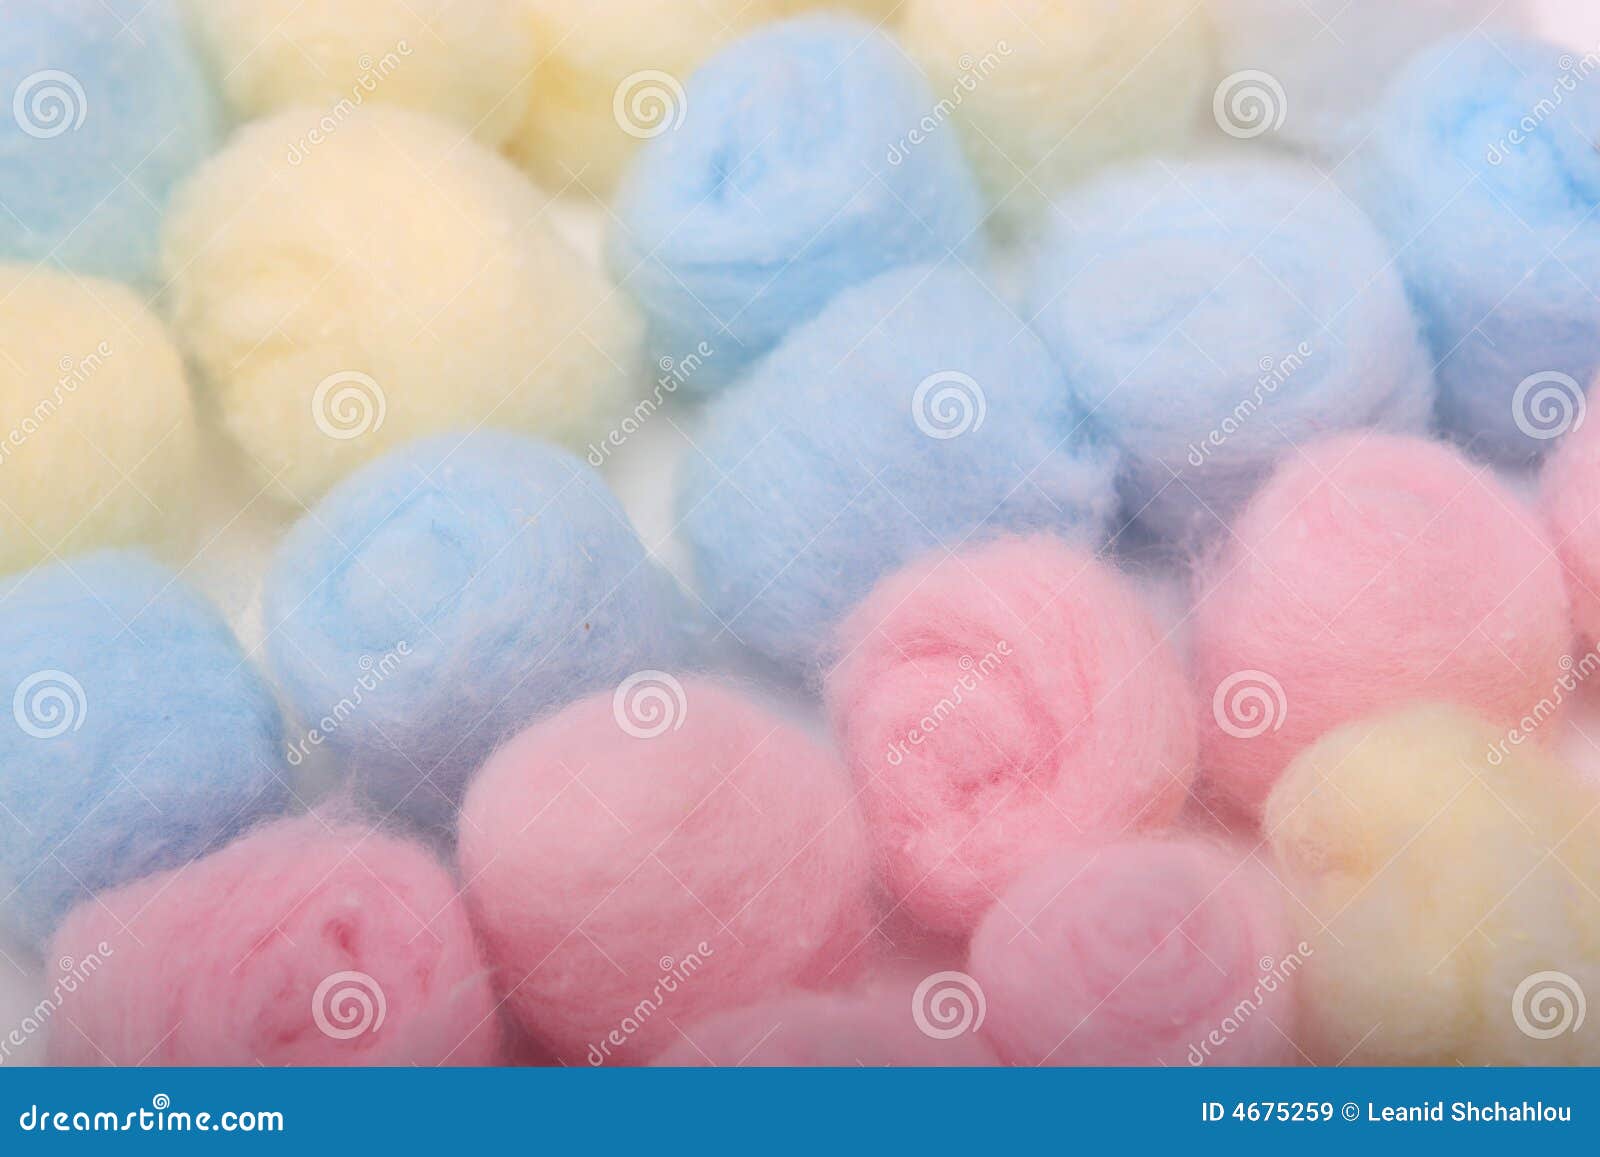 Single Cotton Ball On Blue Stock Photo - Download Image Now